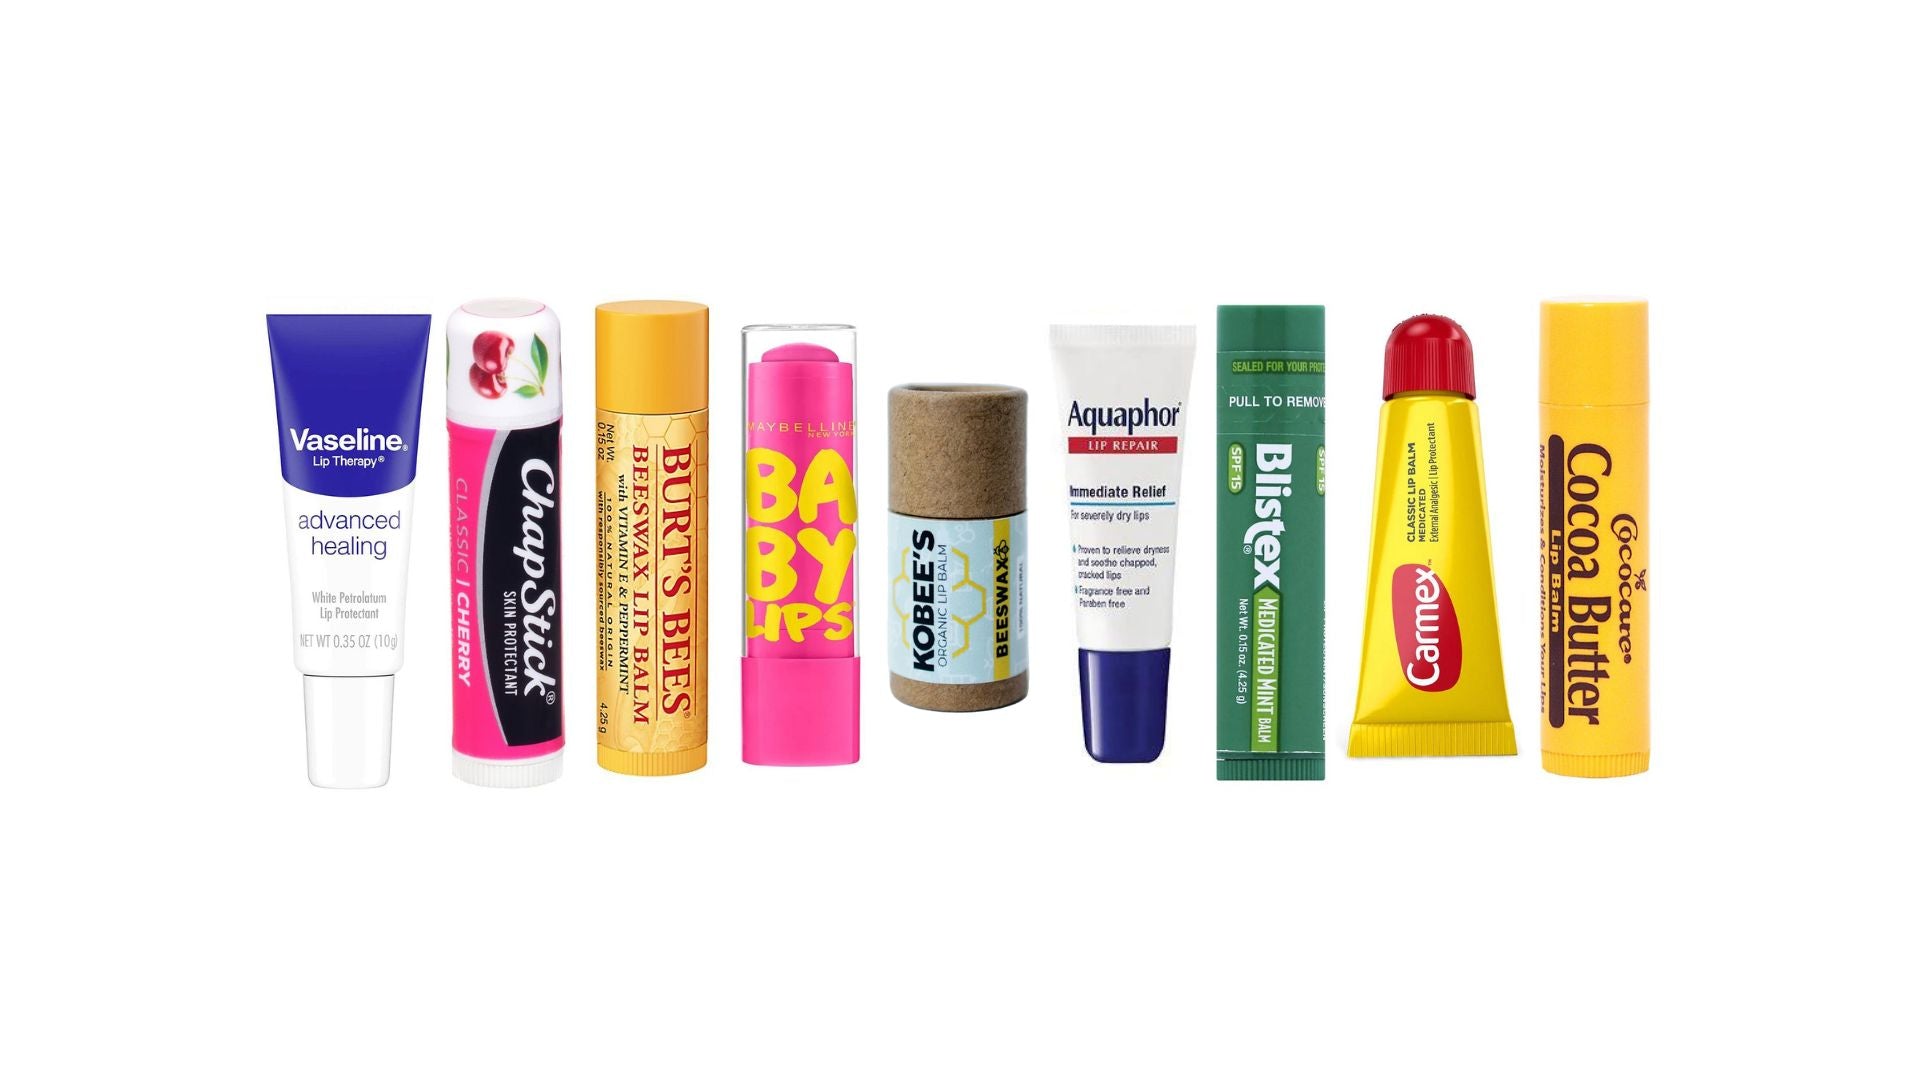 A collection of popular lip balm brands including: Vaseline, ChapStick, Burt's Bees, Baby Lips, Kobee's, Aquaphor, Blistex, Carmex, and Cococare